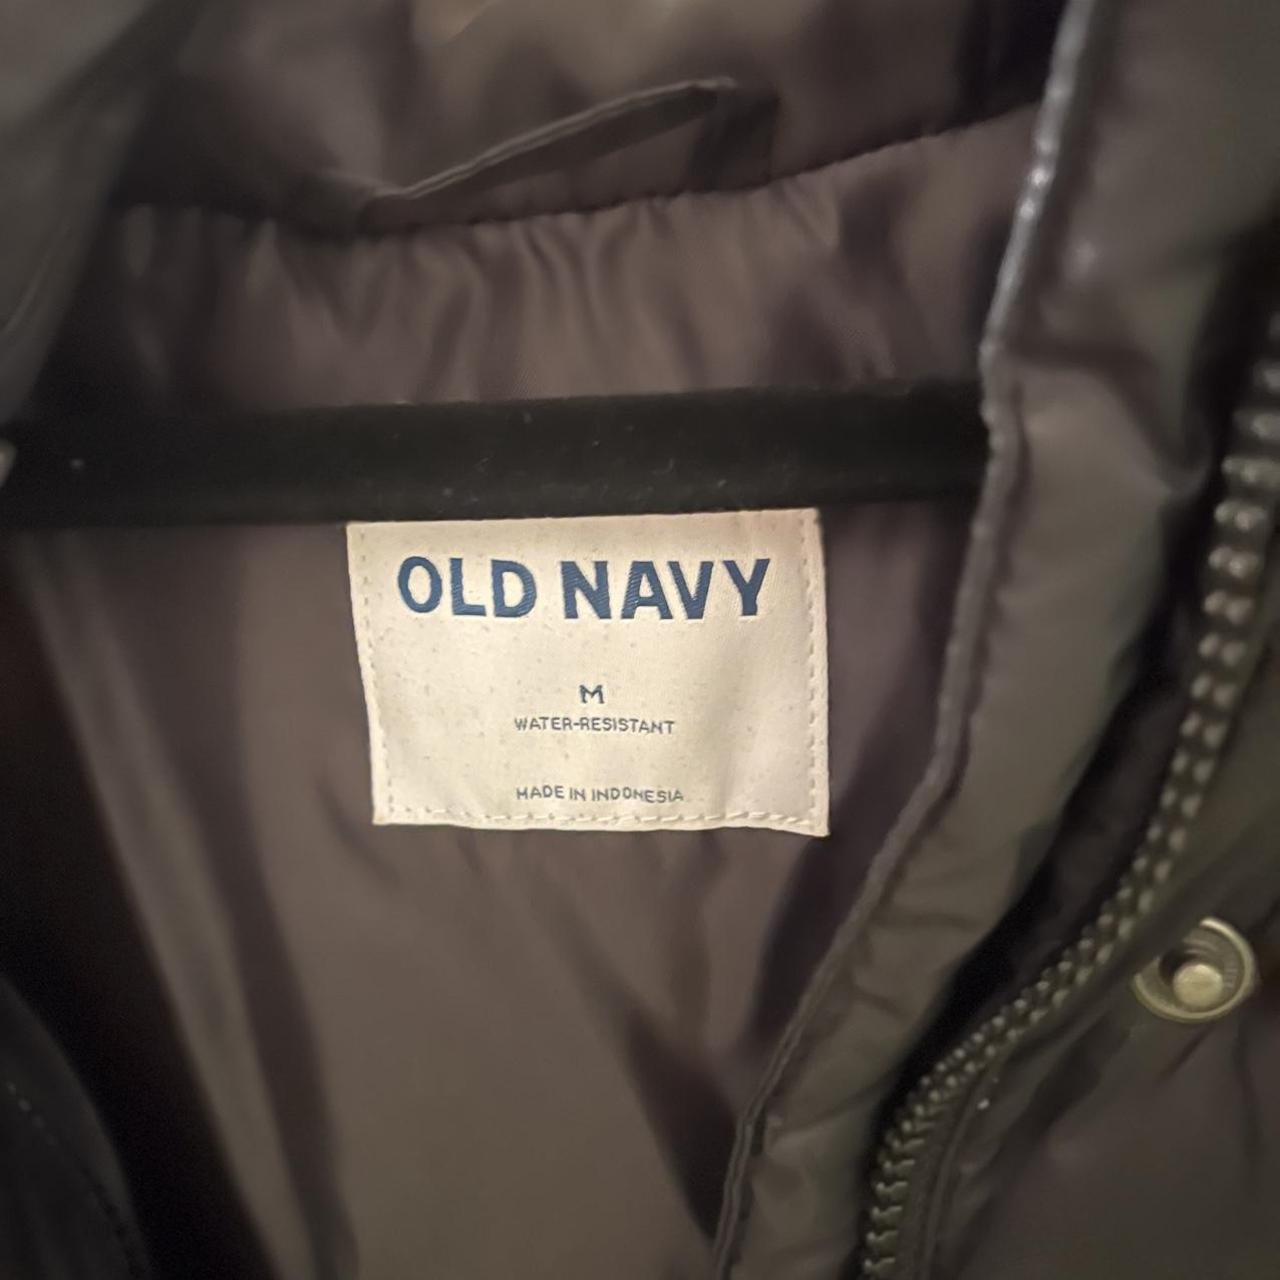 Old navy thick puffy jacket worn couple times - Depop